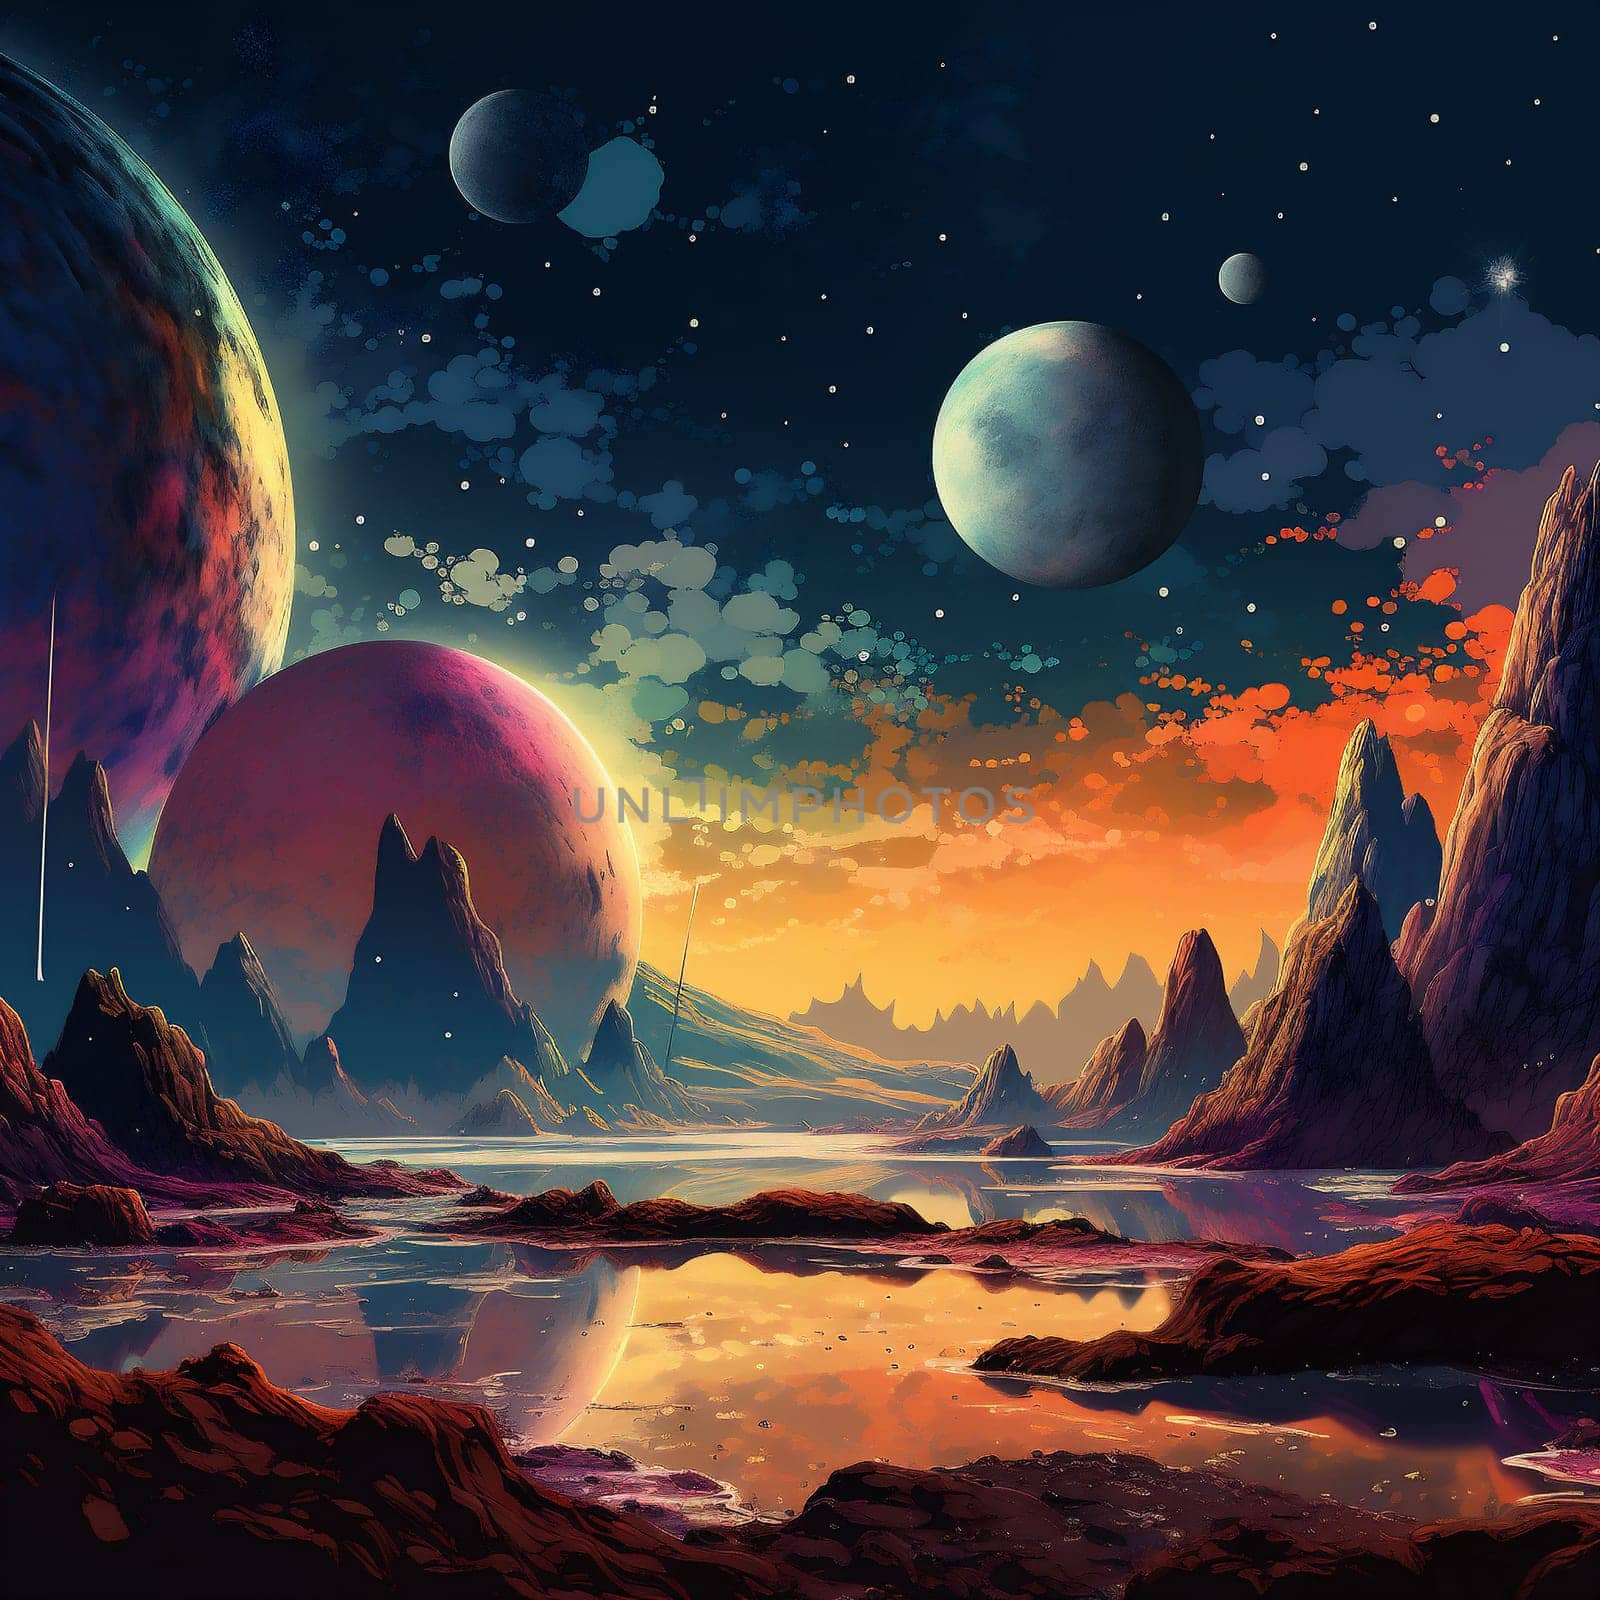 A Surface of Planet with Mountains. Fantasy Landscape. by Rina_Dozornaya